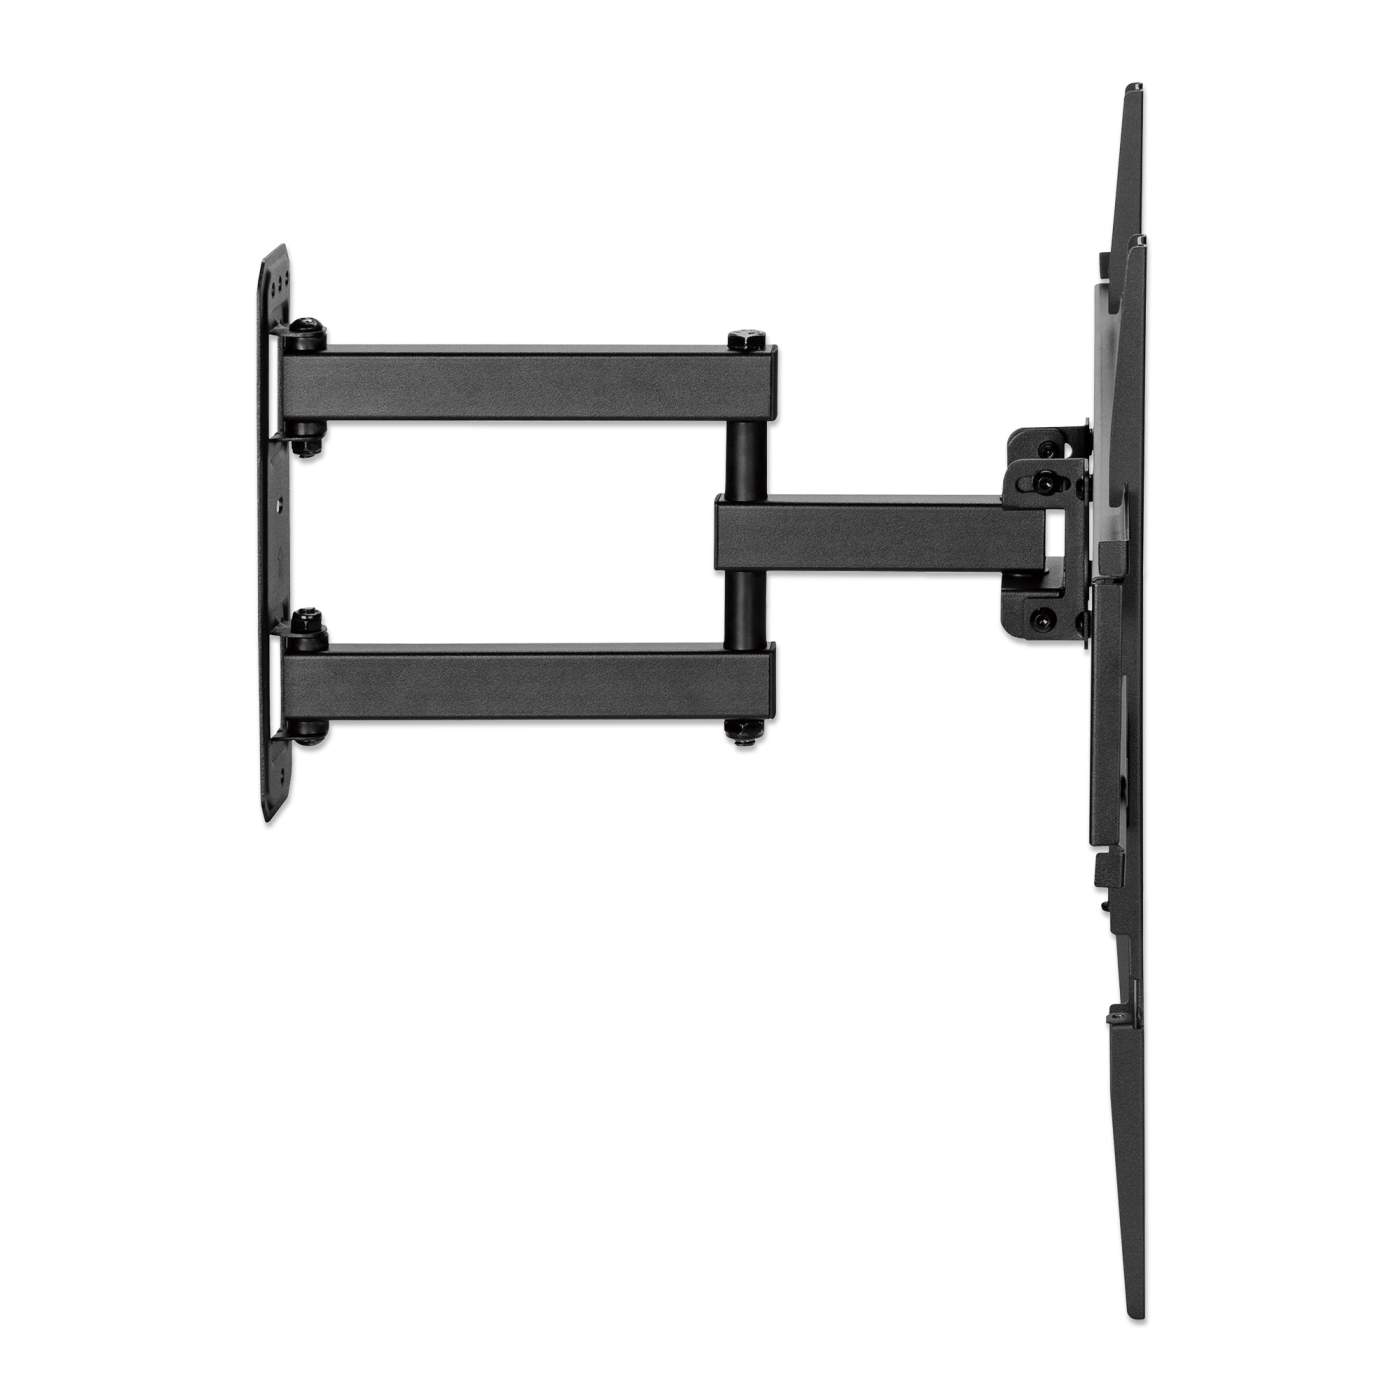 Full-Motion TV Wall Mount with Post-Leveling Adjustment Image 5